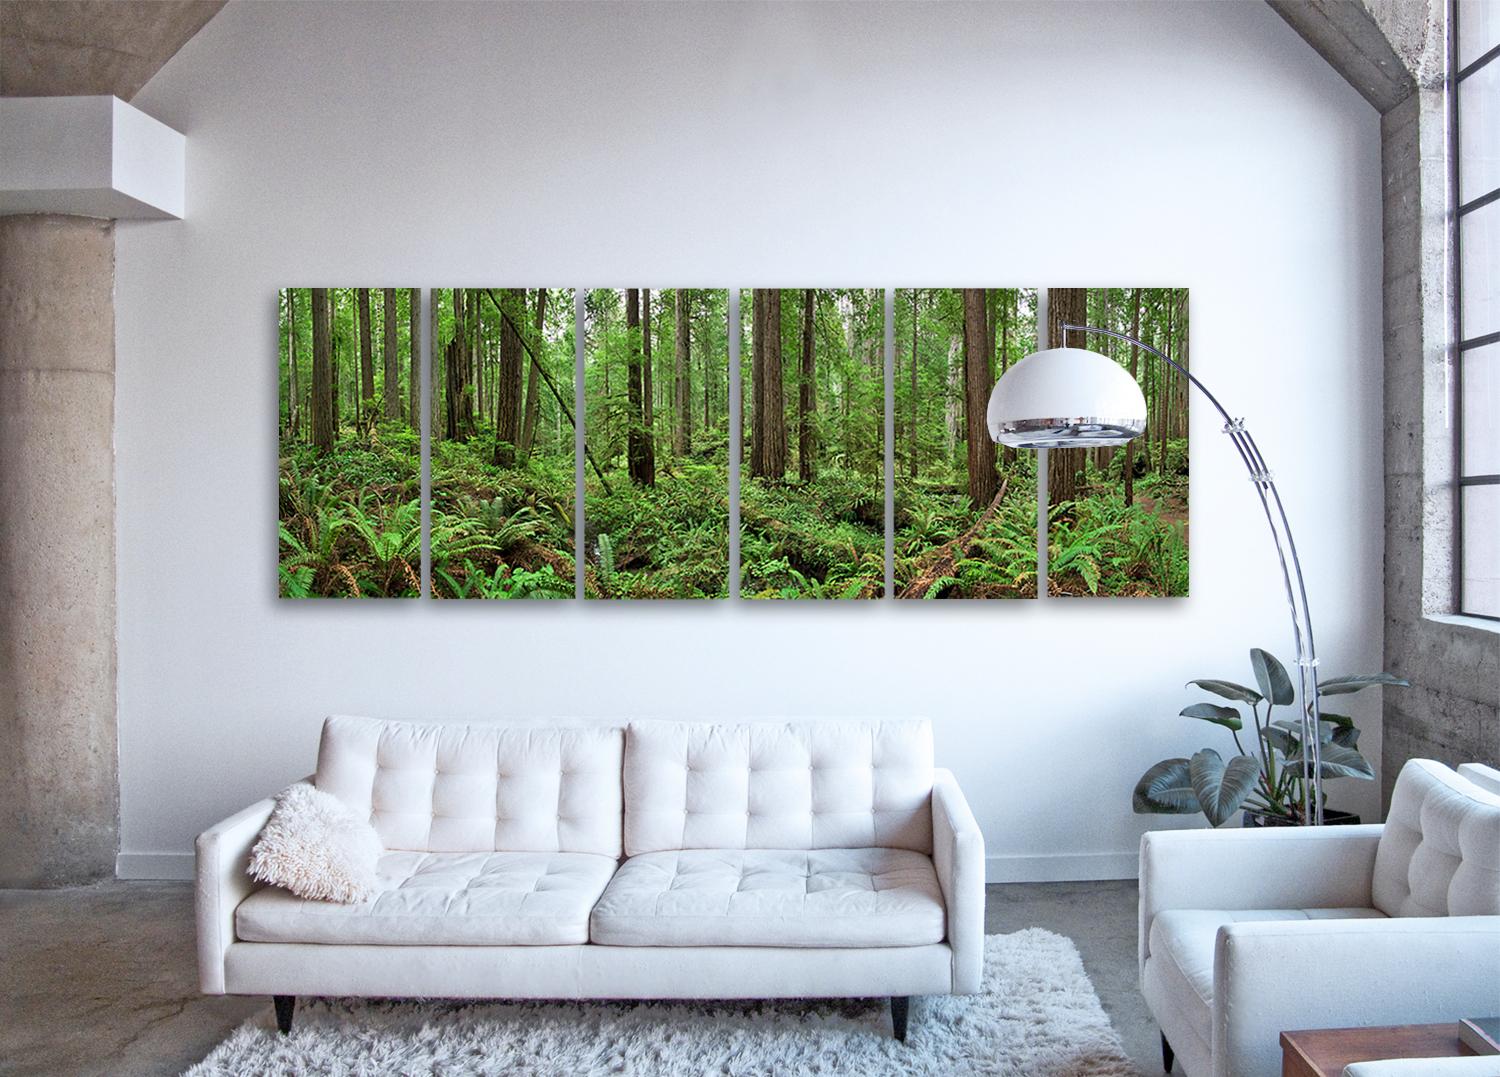 Redwoods - large format nature observation in six individual photograph  - Photograph by Erik Pawassar